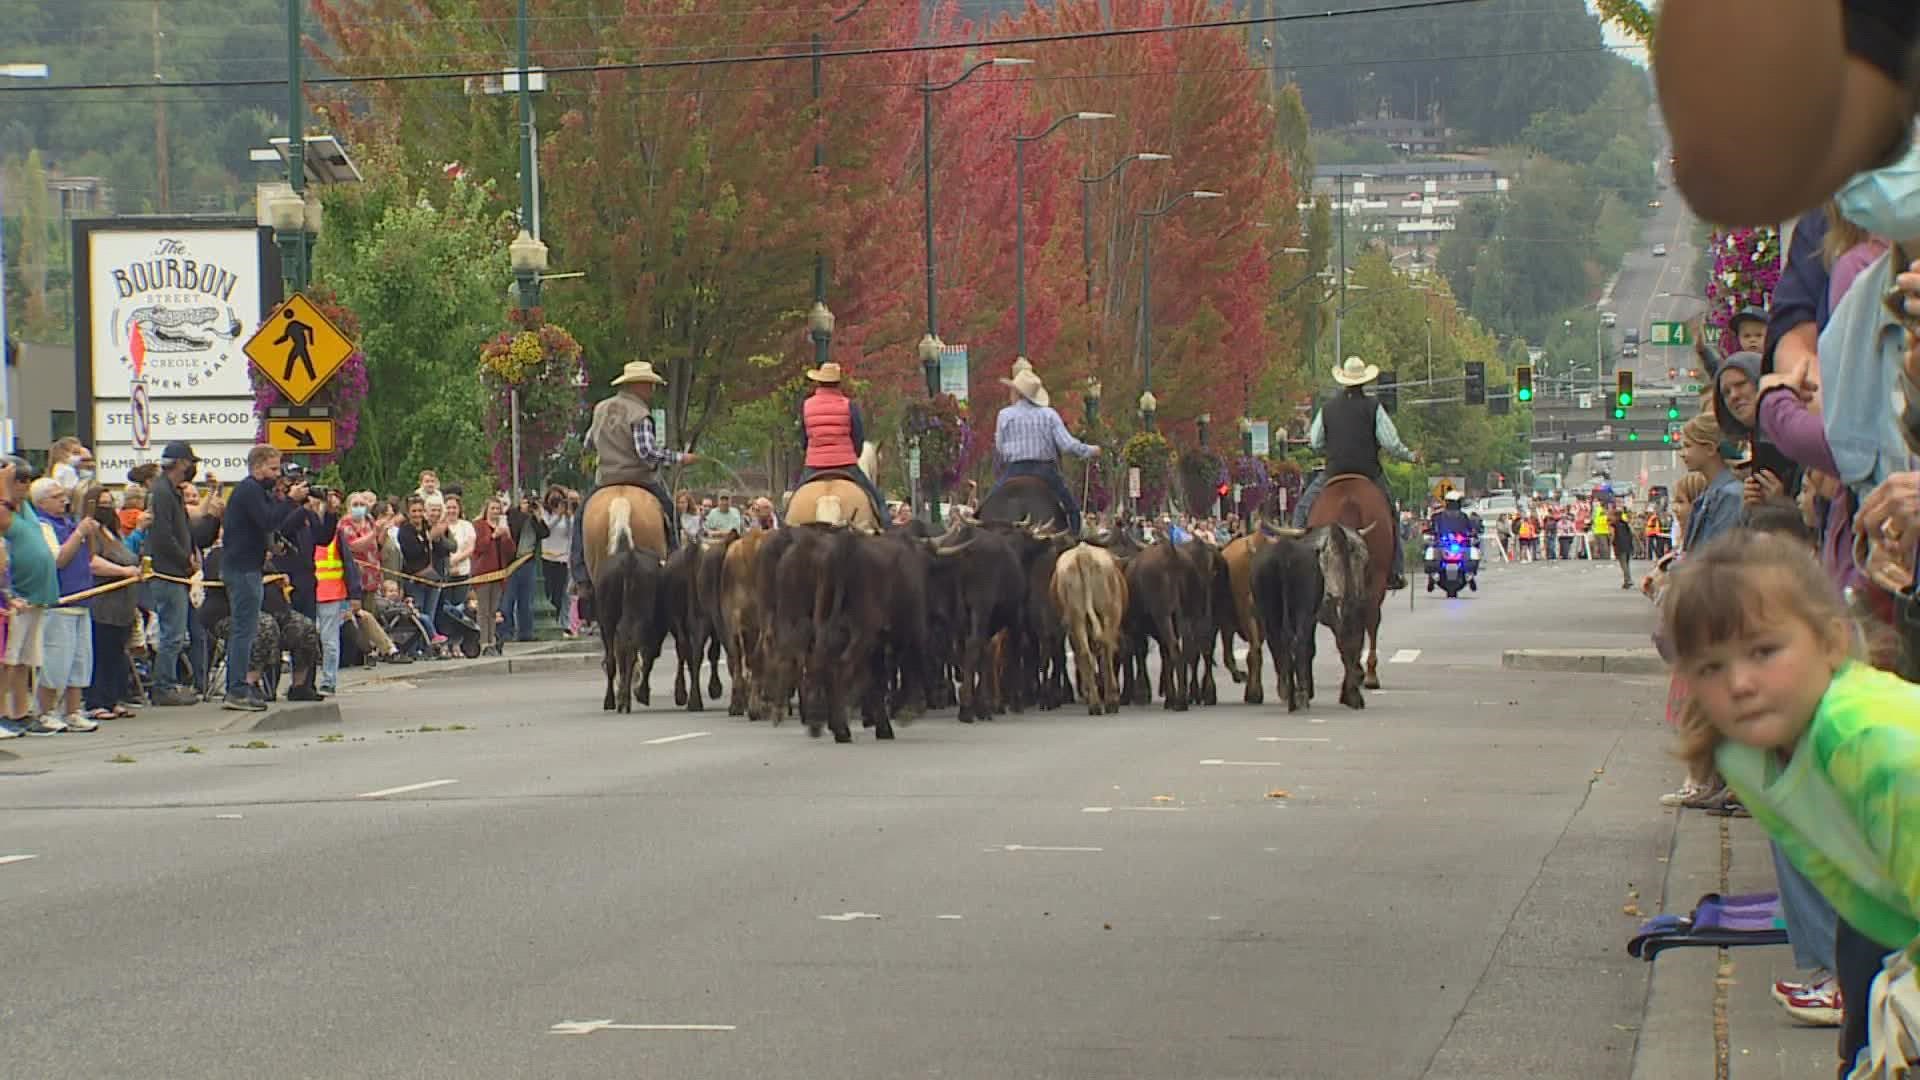 The Washington State Fair's rodeo parade was canceled in 2020 due to the coronavirus pandemic.